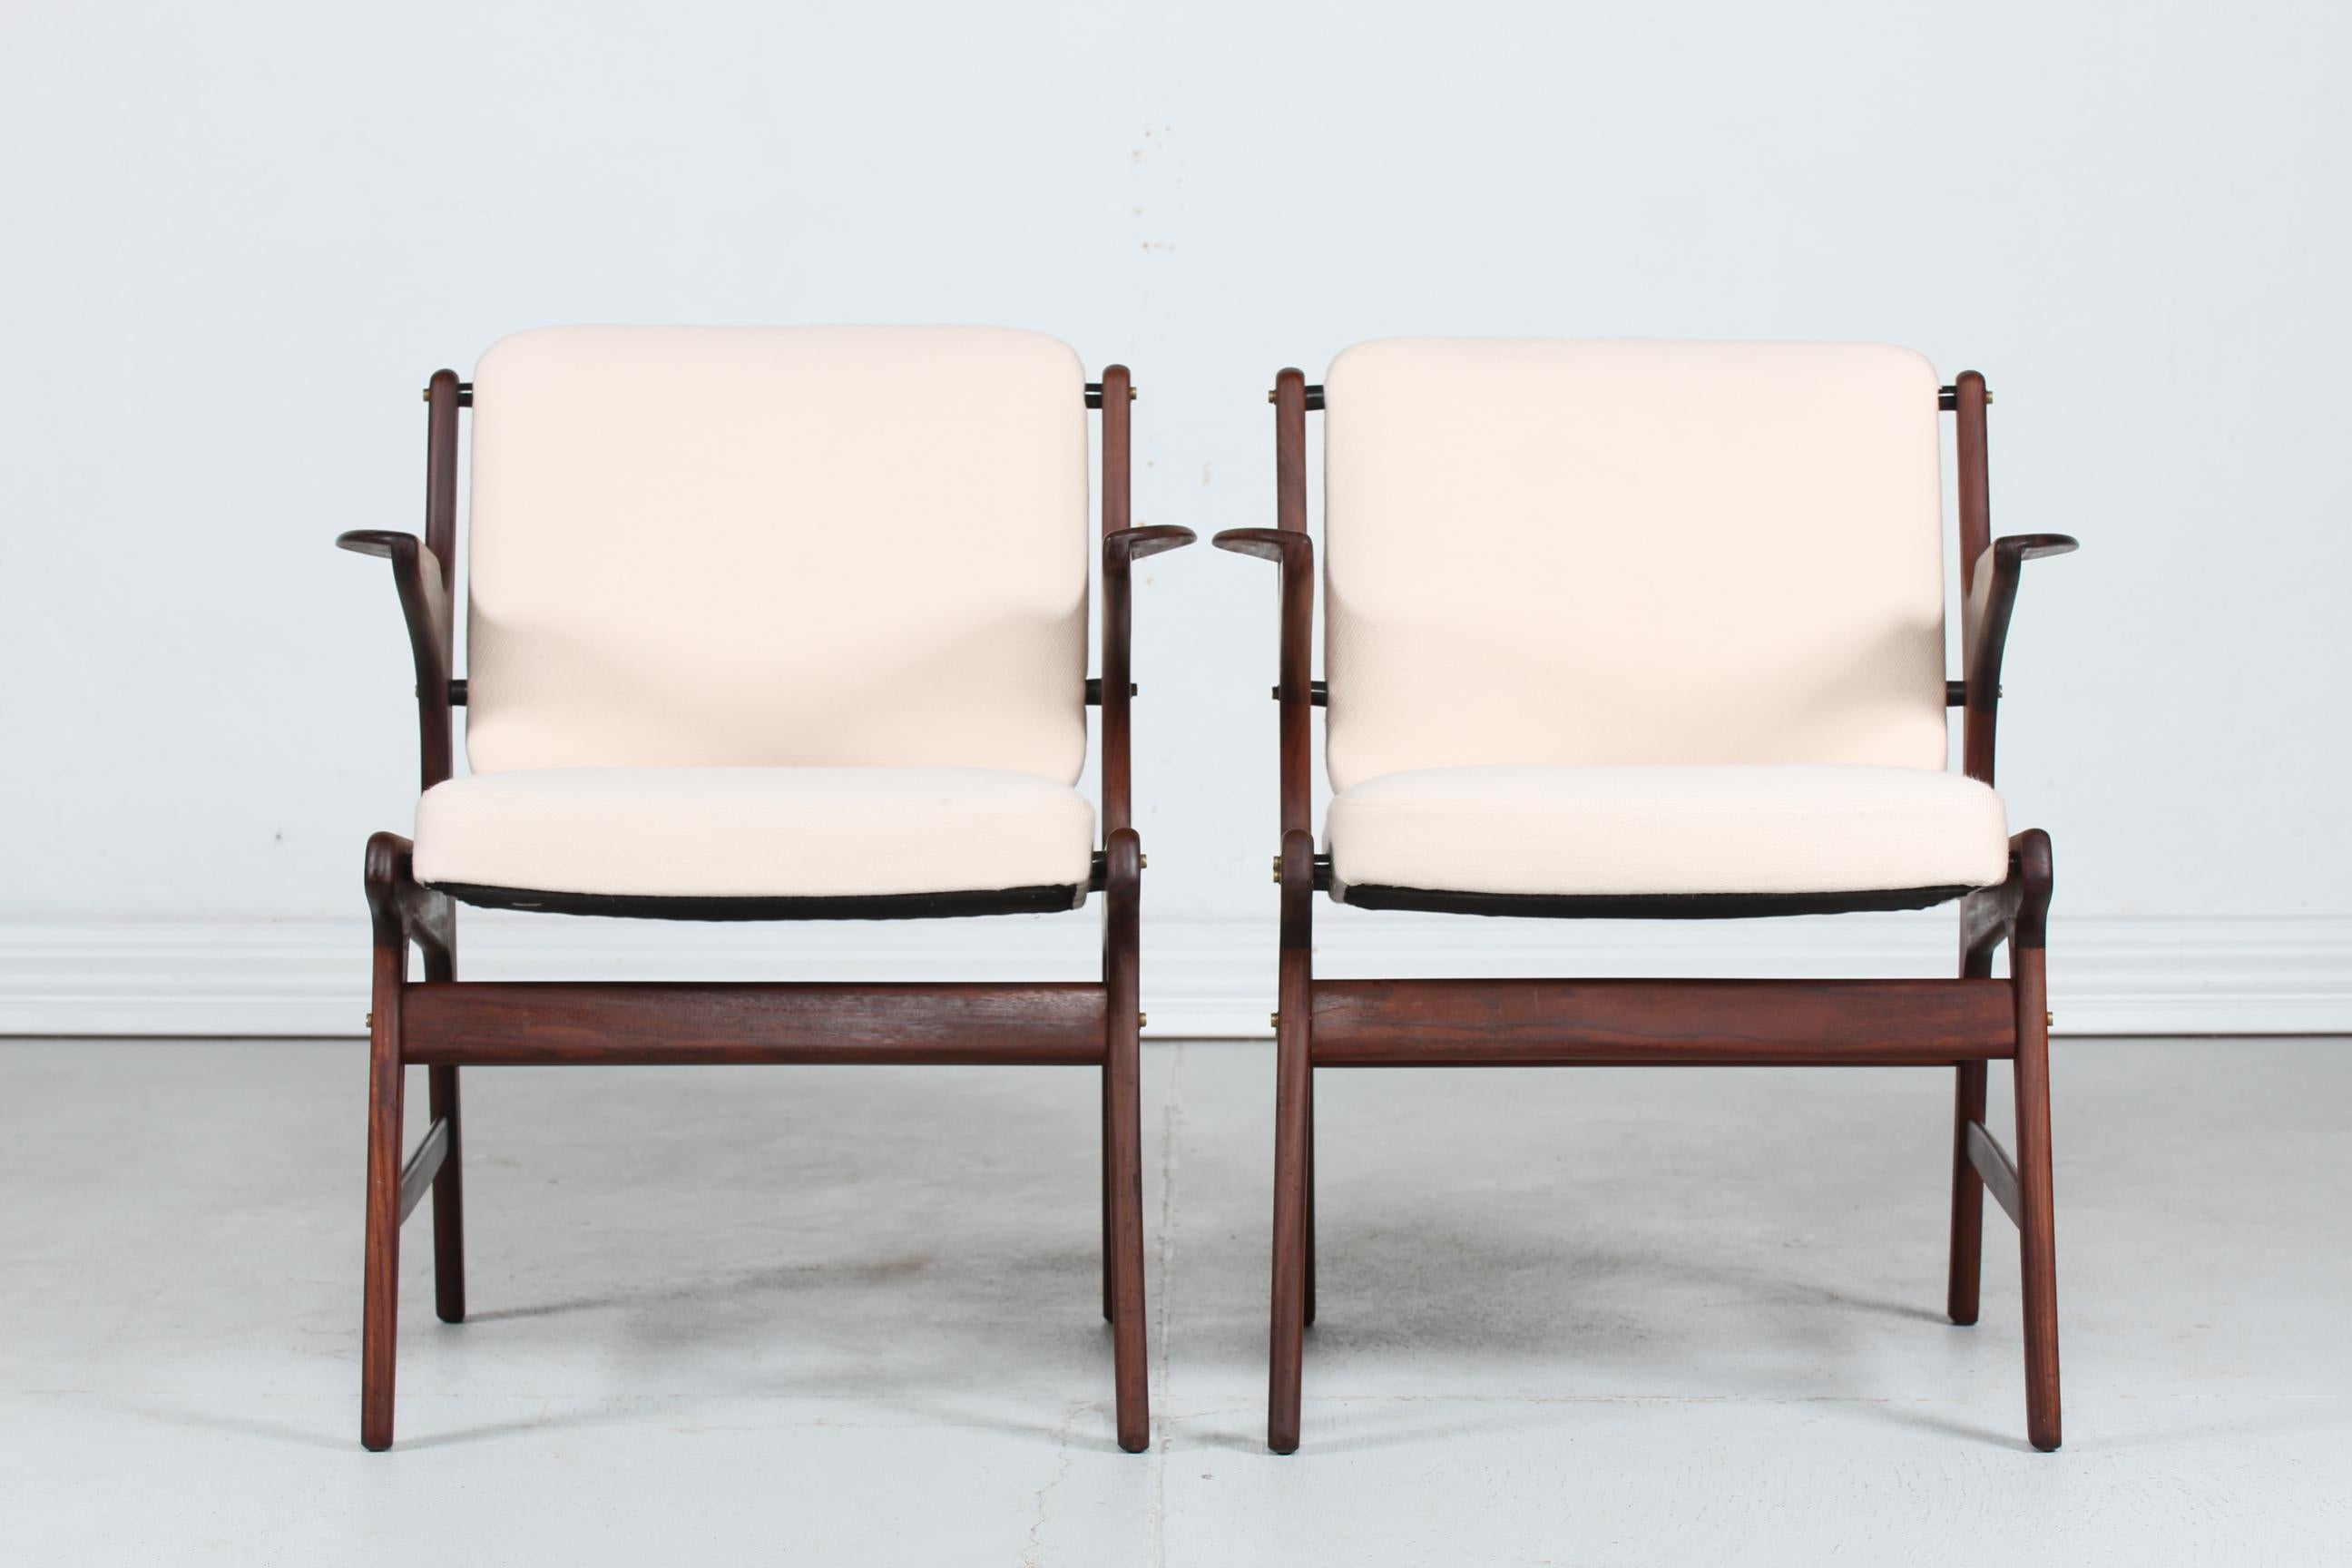 Pair of midcentury easy armchairs model 310 by Arne Hovmand-Olsen
They are made in Denmark in the 1960s most likely by Komfort in Randers

The frames are made of solid teak with brass screws upholstery with light colored fabric.


   